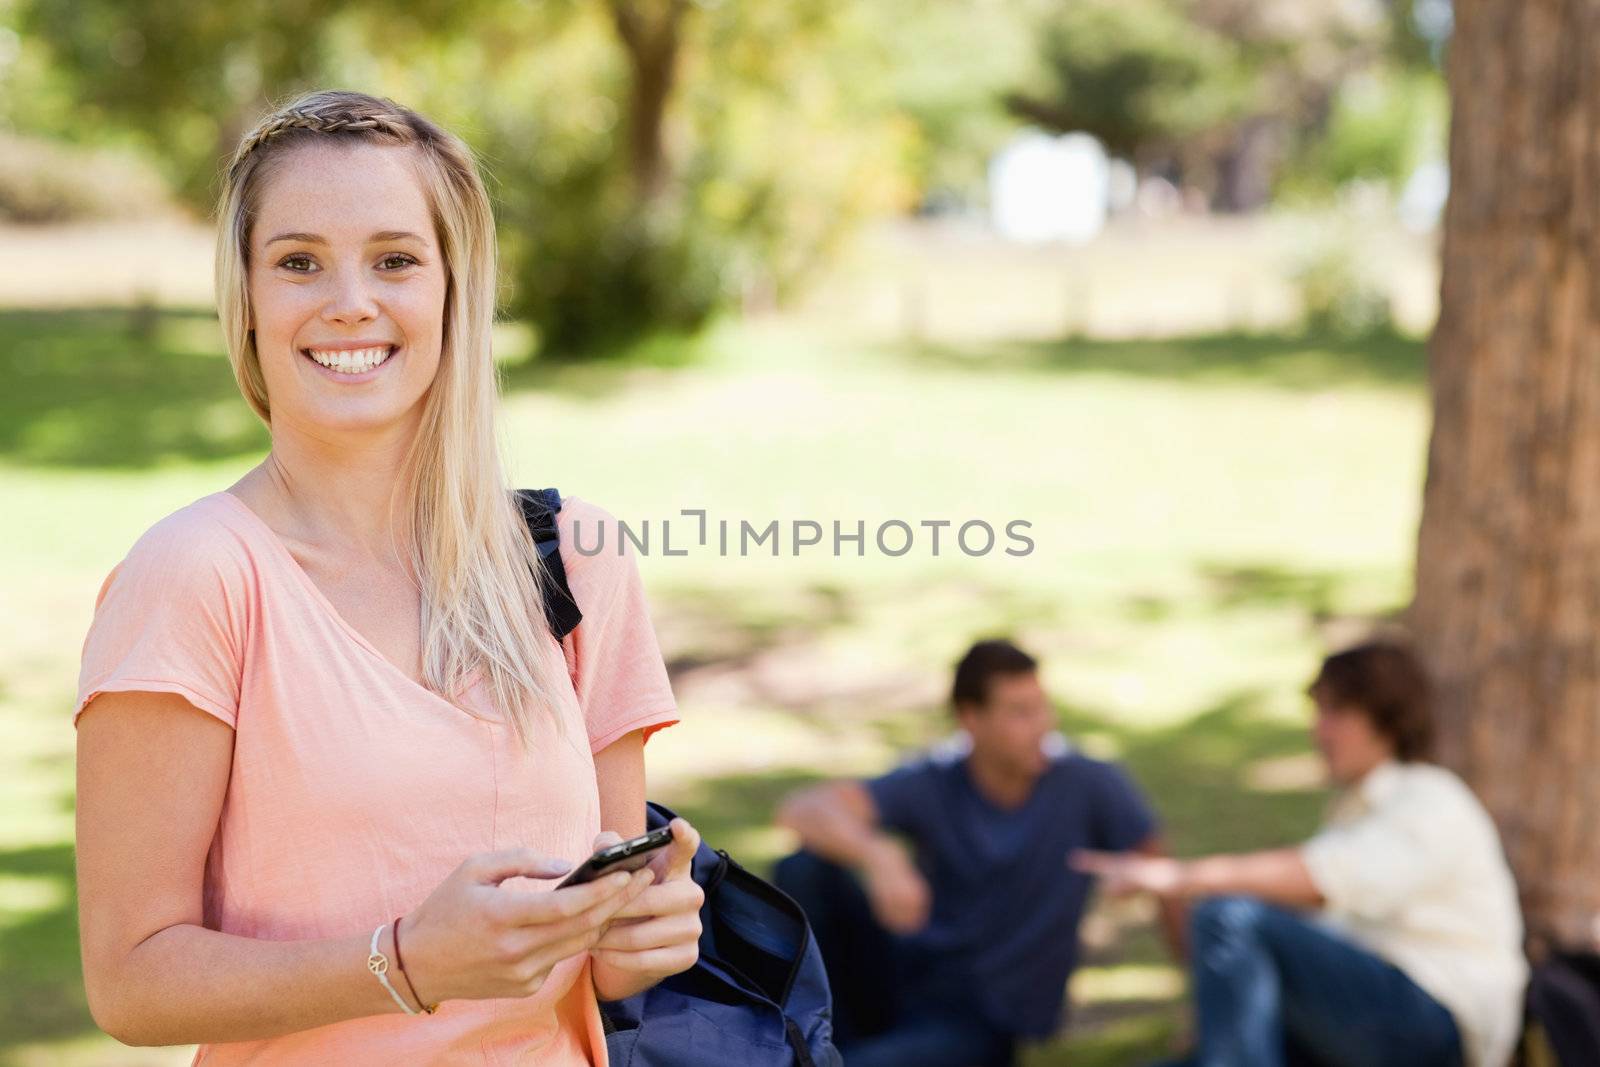 Portrait of a smiling girl using a smartphone in a park with friends in background